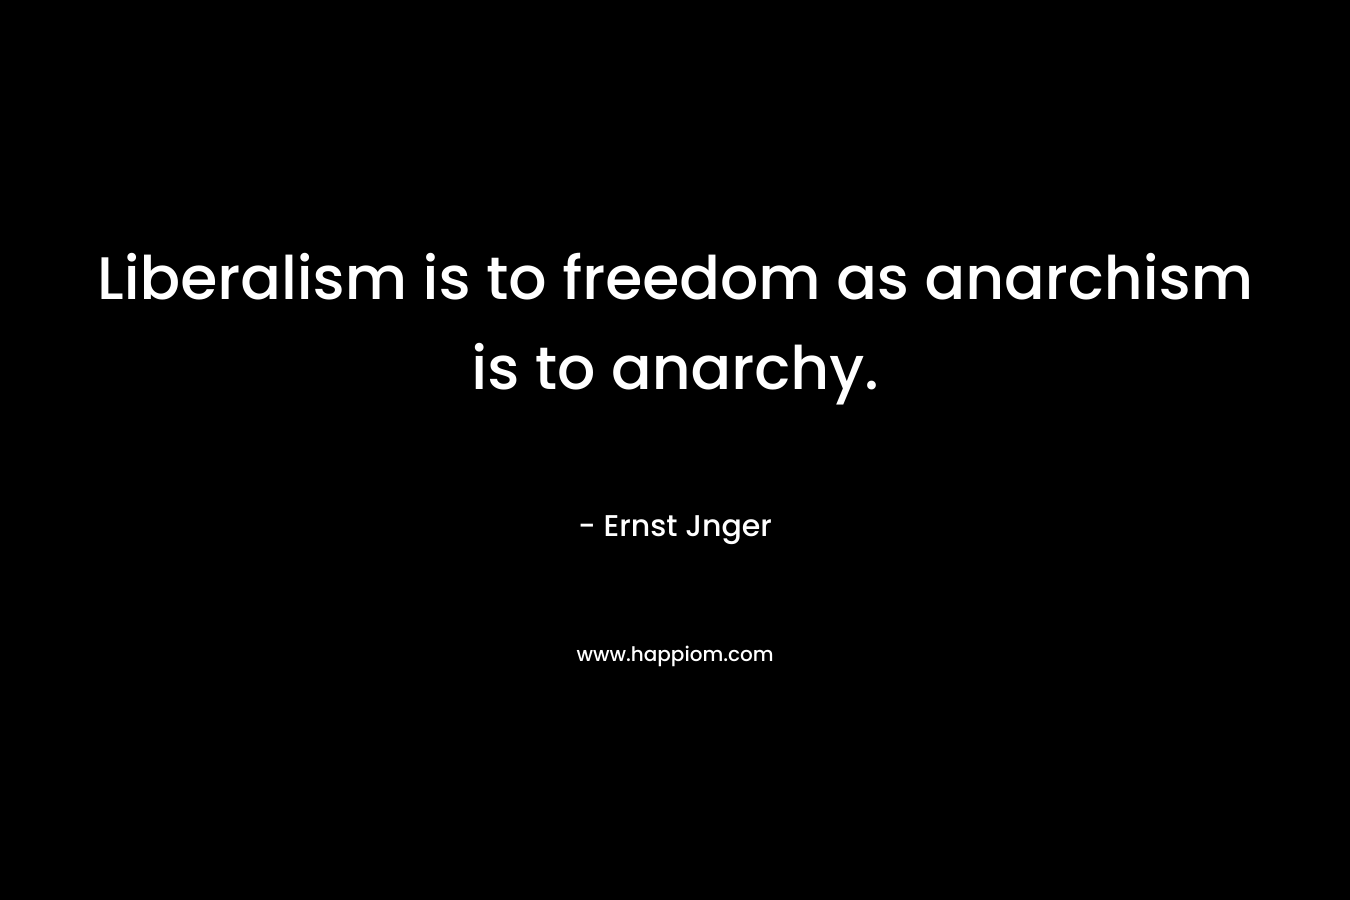 Liberalism is to freedom as anarchism is to anarchy. – Ernst Jnger